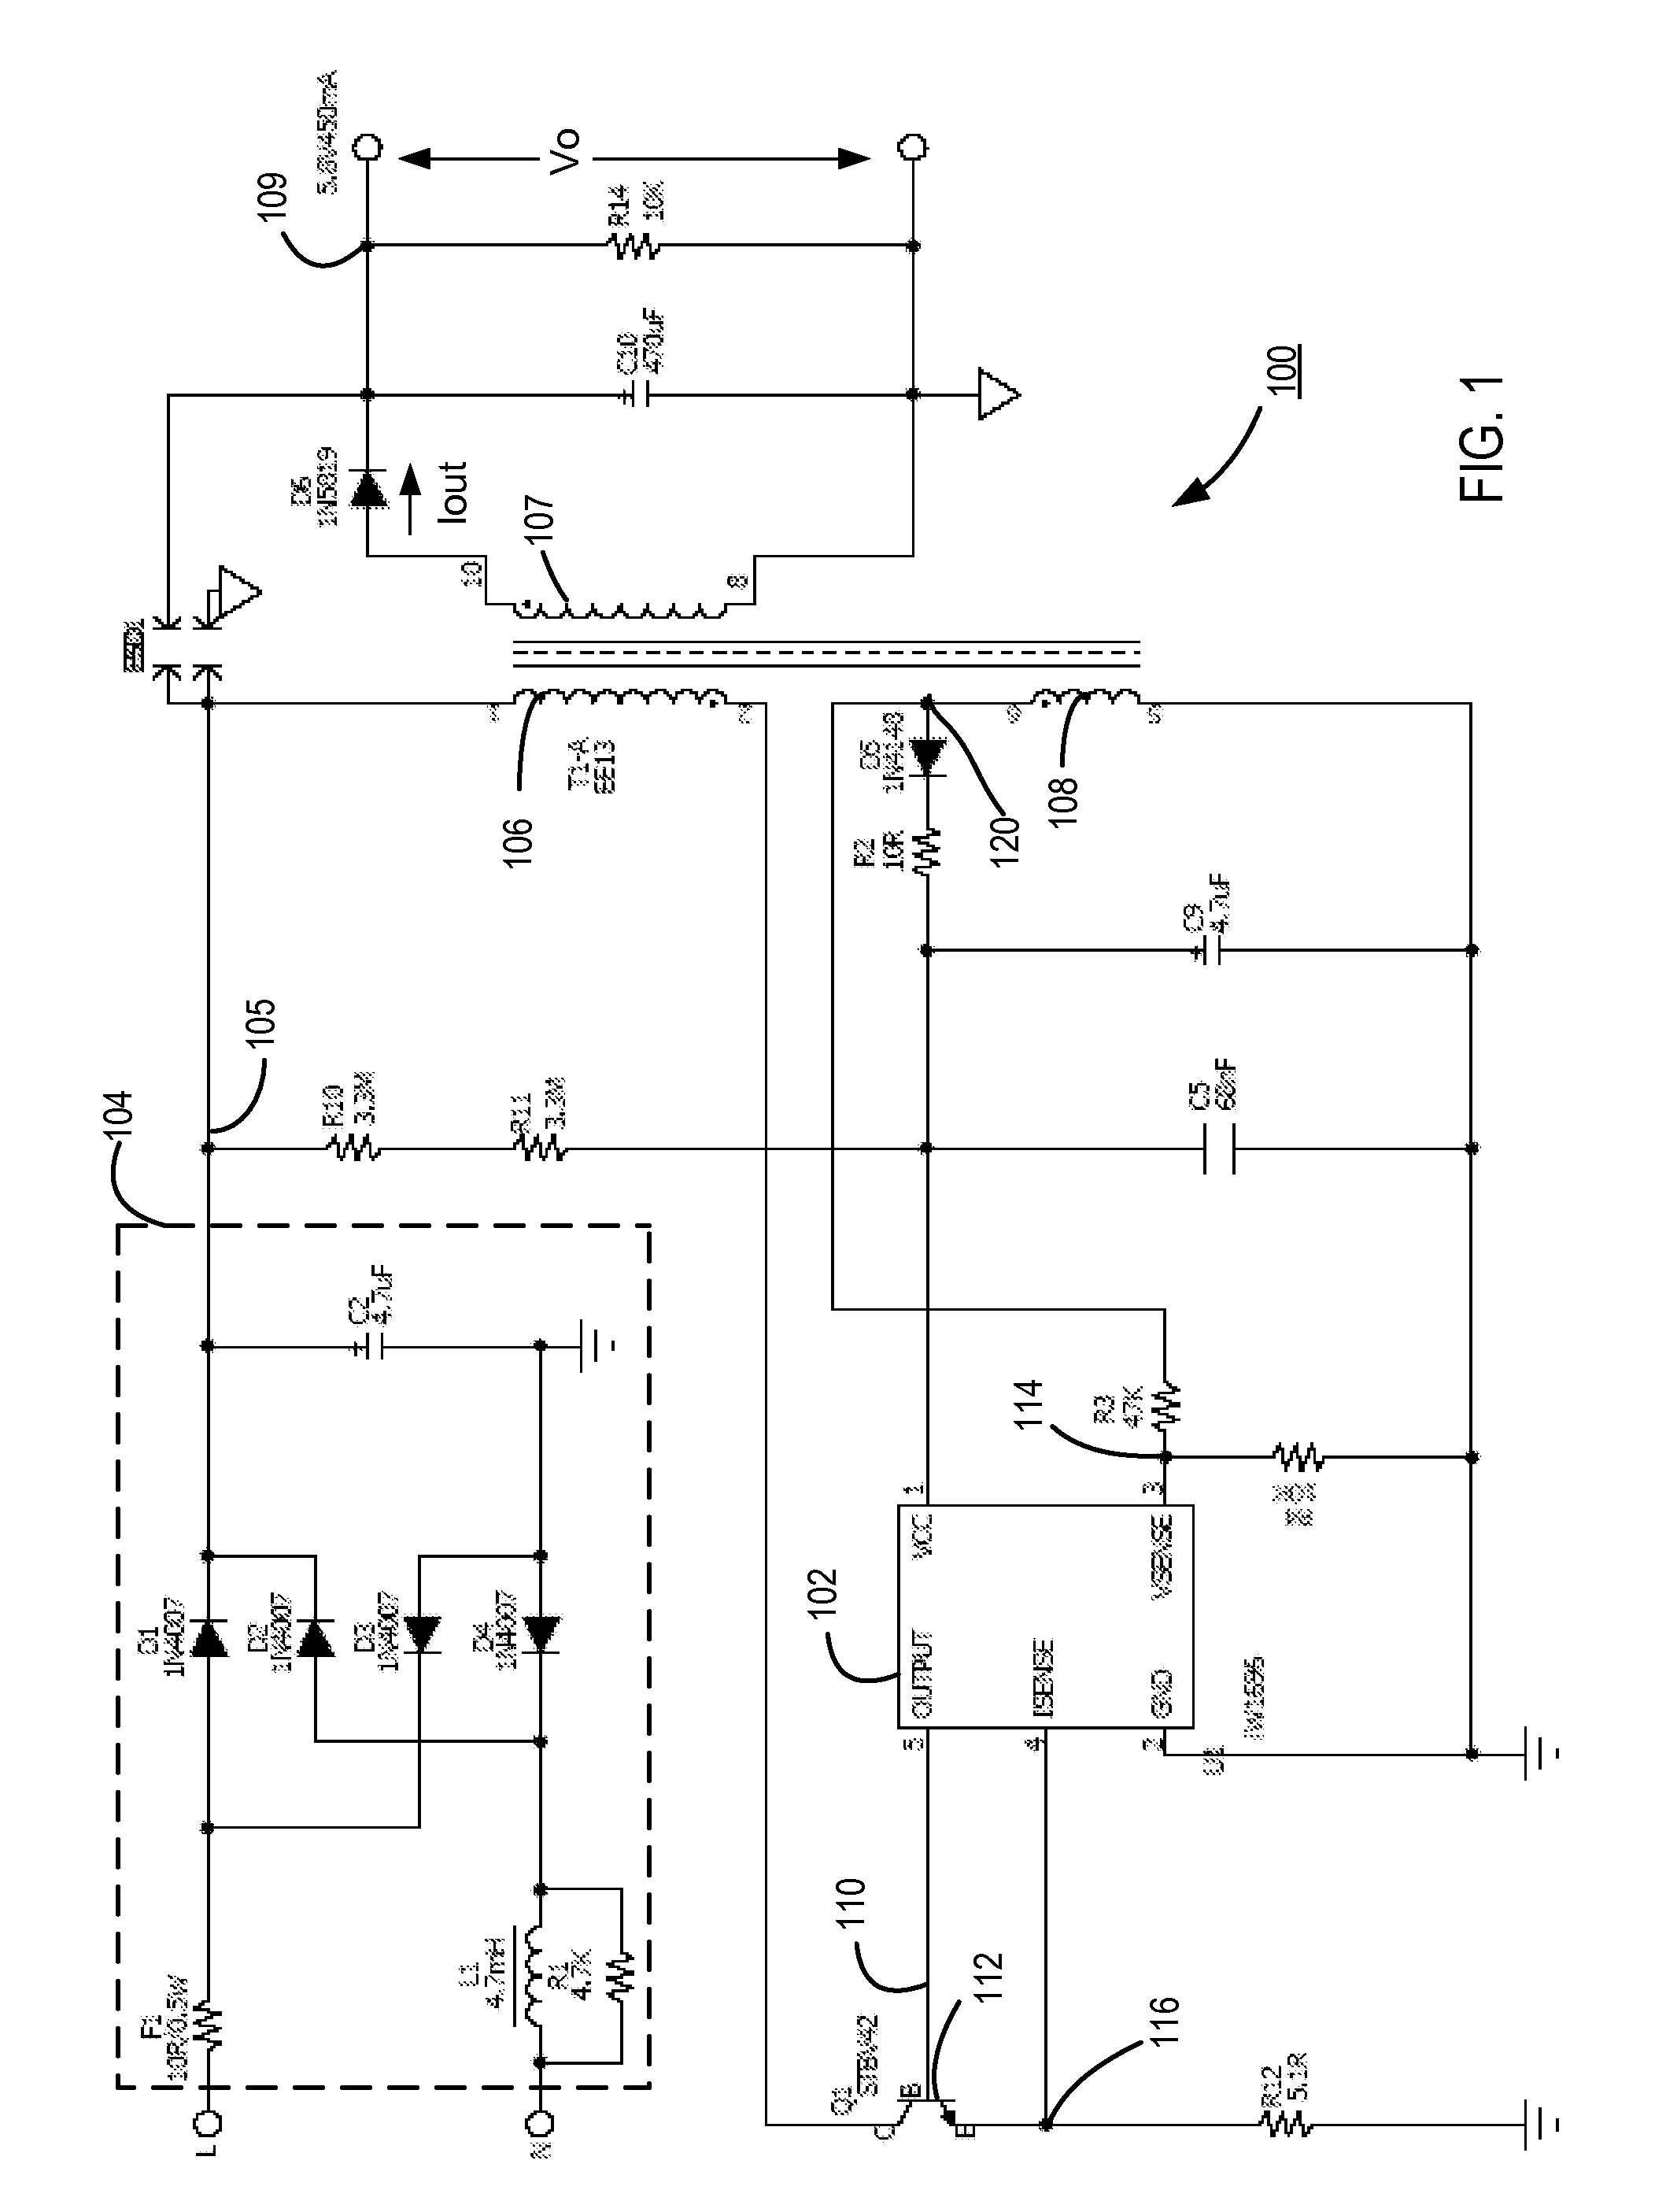 Valley-mode switching schemes for switching power converters